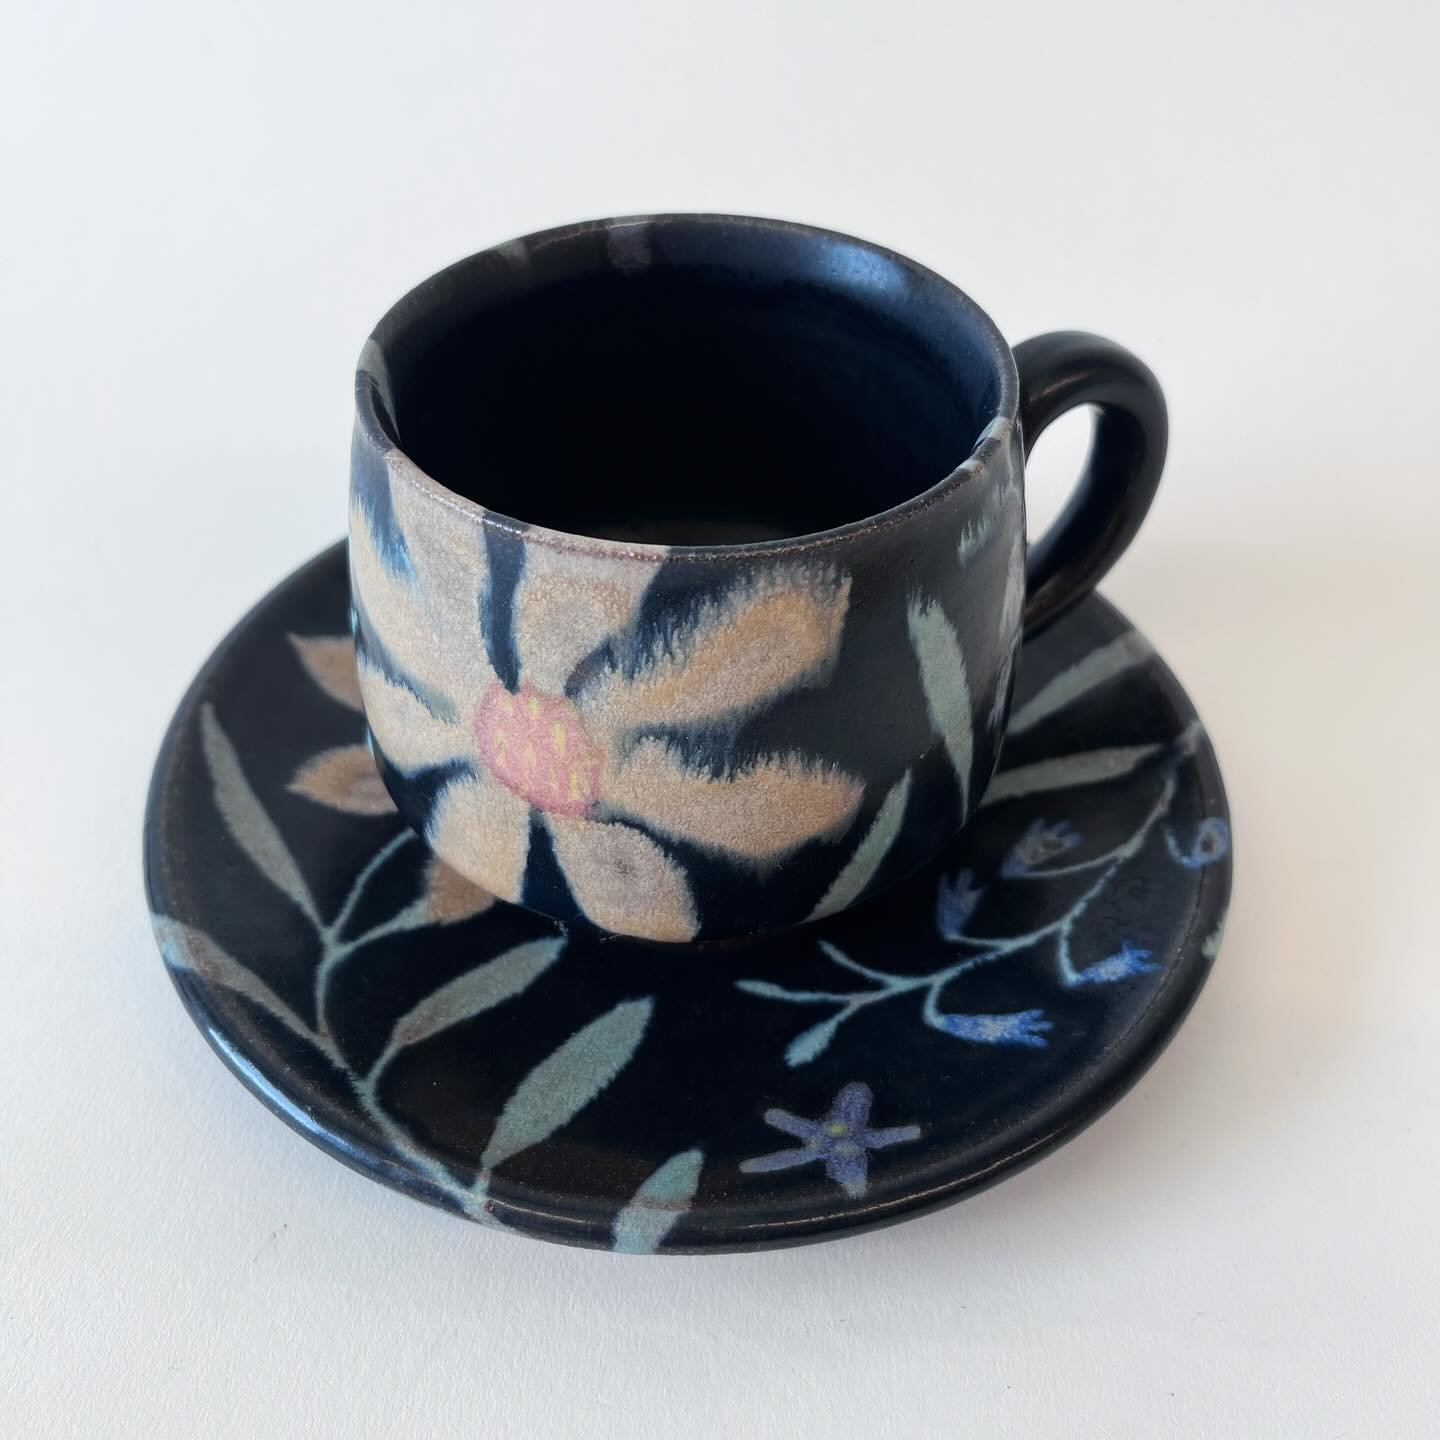 Thank you to everyone who checked out my latest batch of works. I am so grateful for the appreciation and support! It fuels me to get back into the studio and make more

Photos are different perspectives of two different cup and saucer set so you can